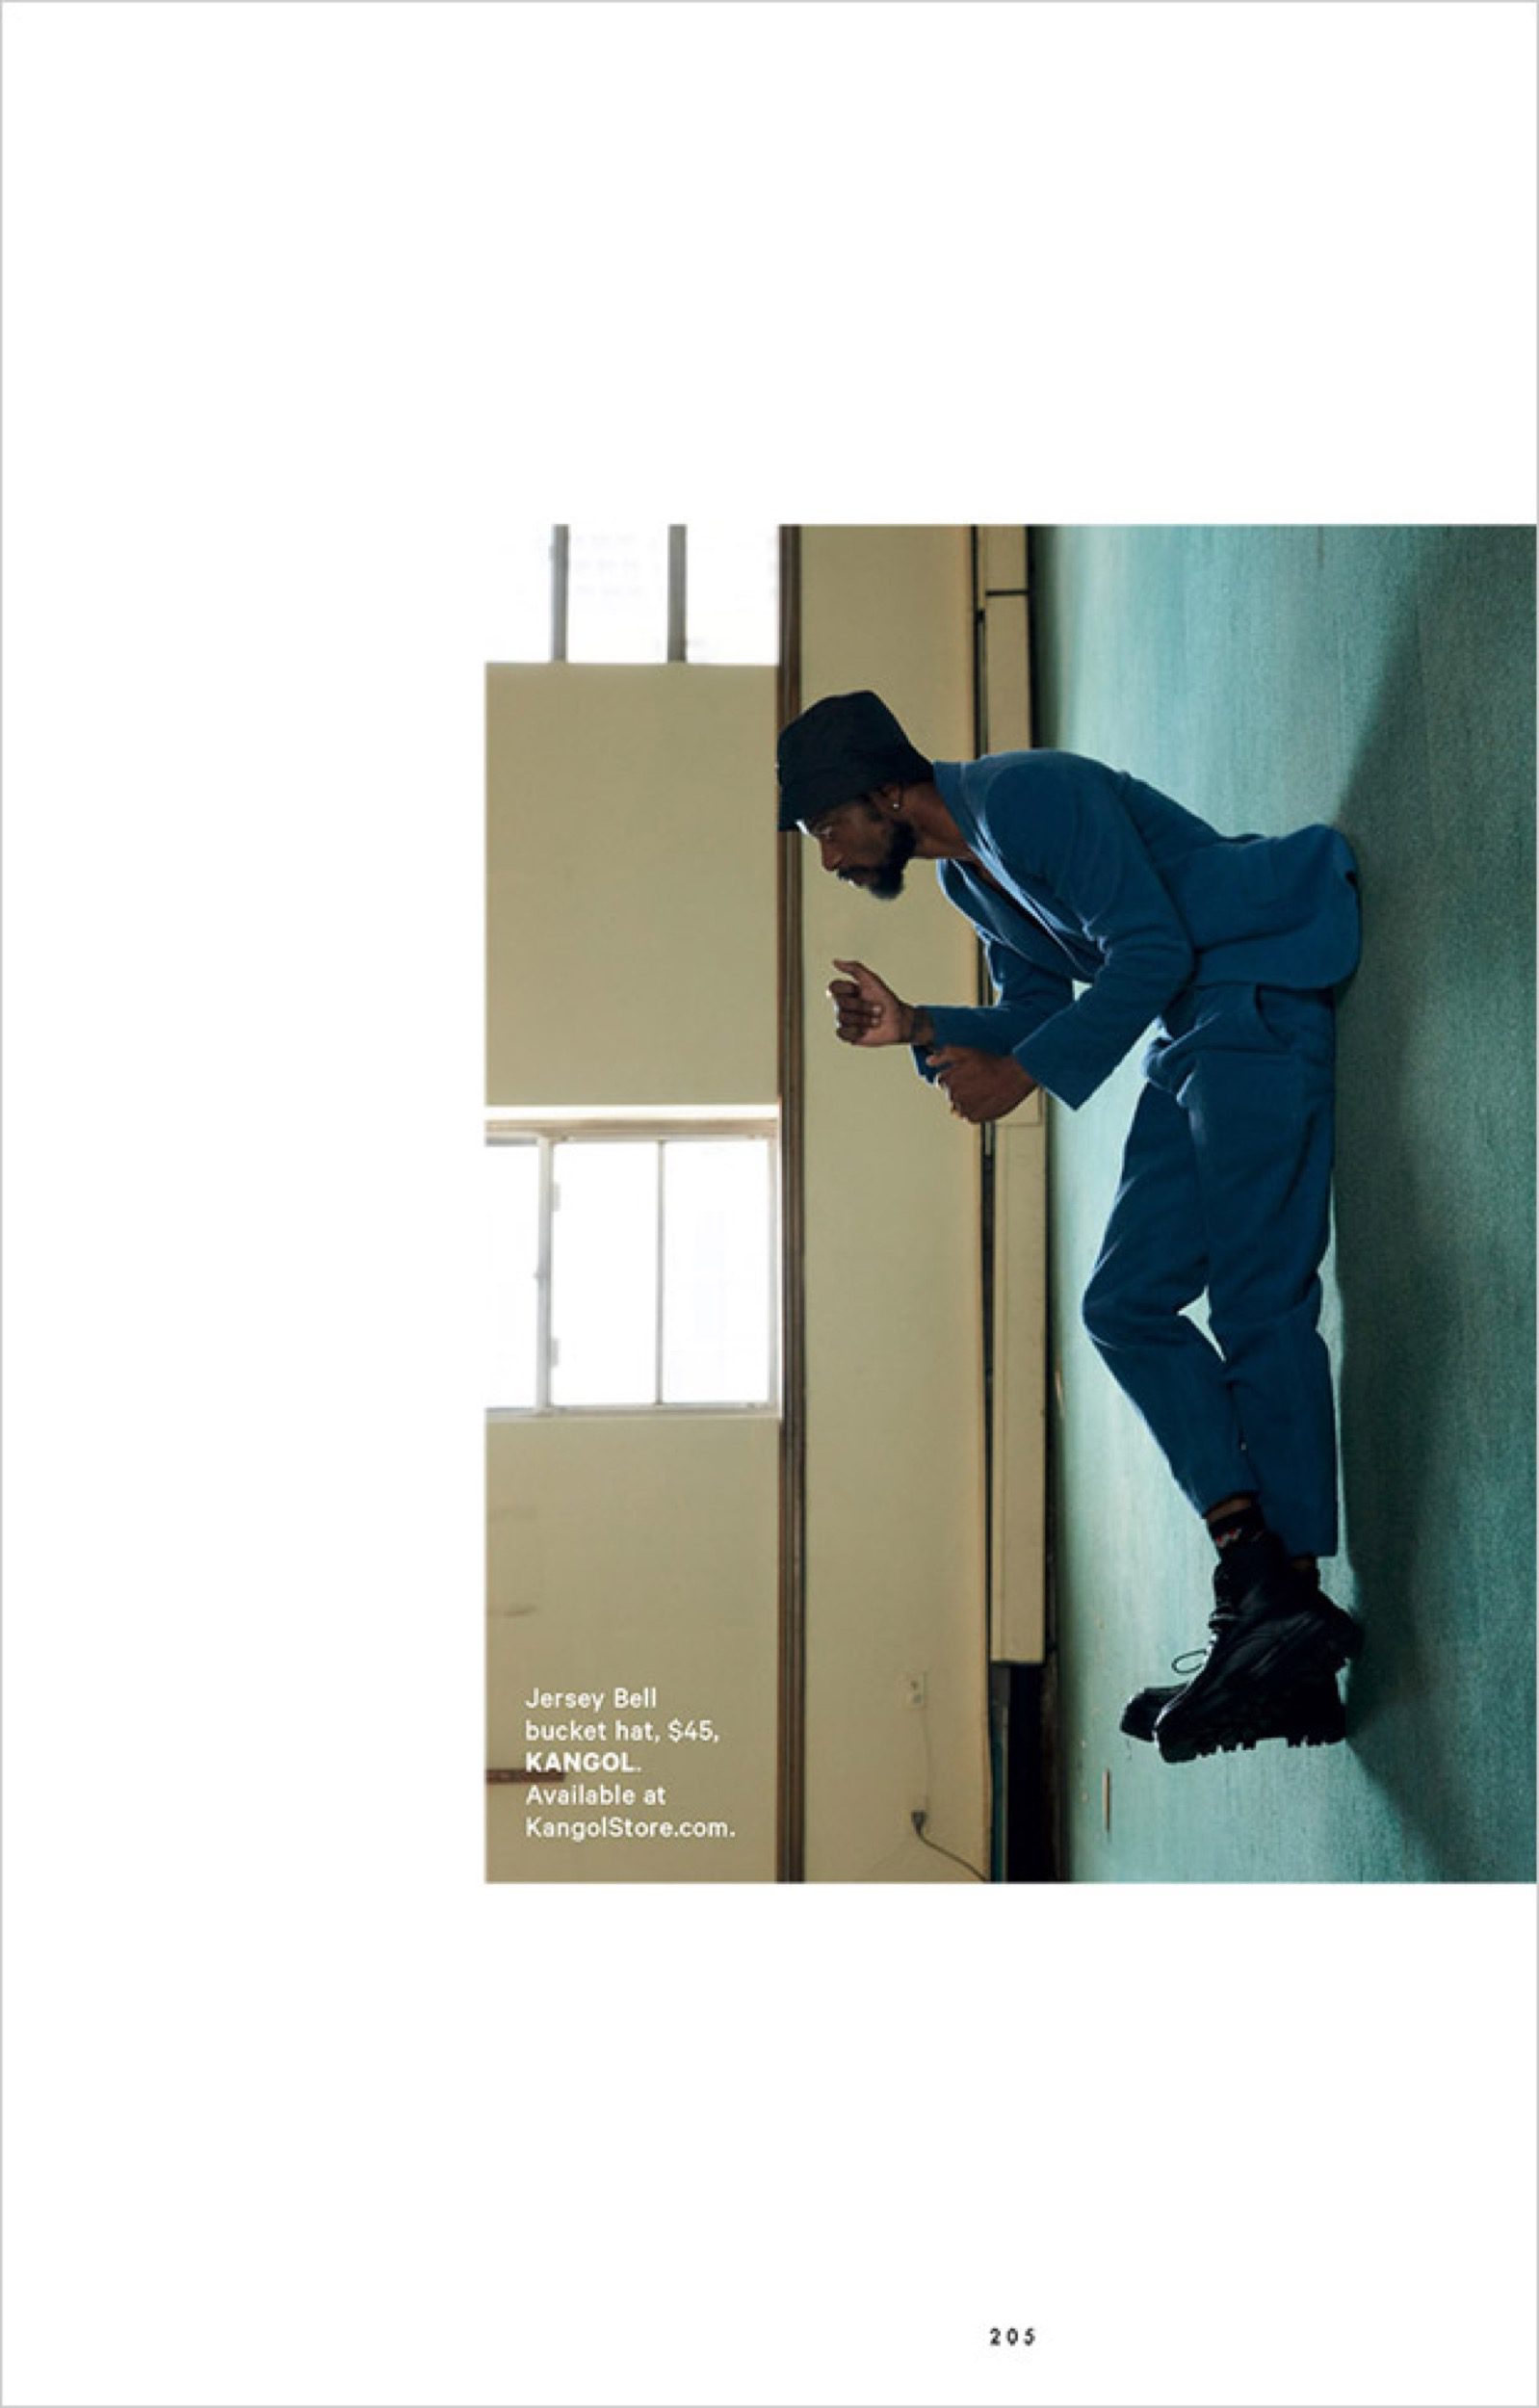 kathrin-hohberg-essential-homme-lakeith-stanfield-david-roemer-10